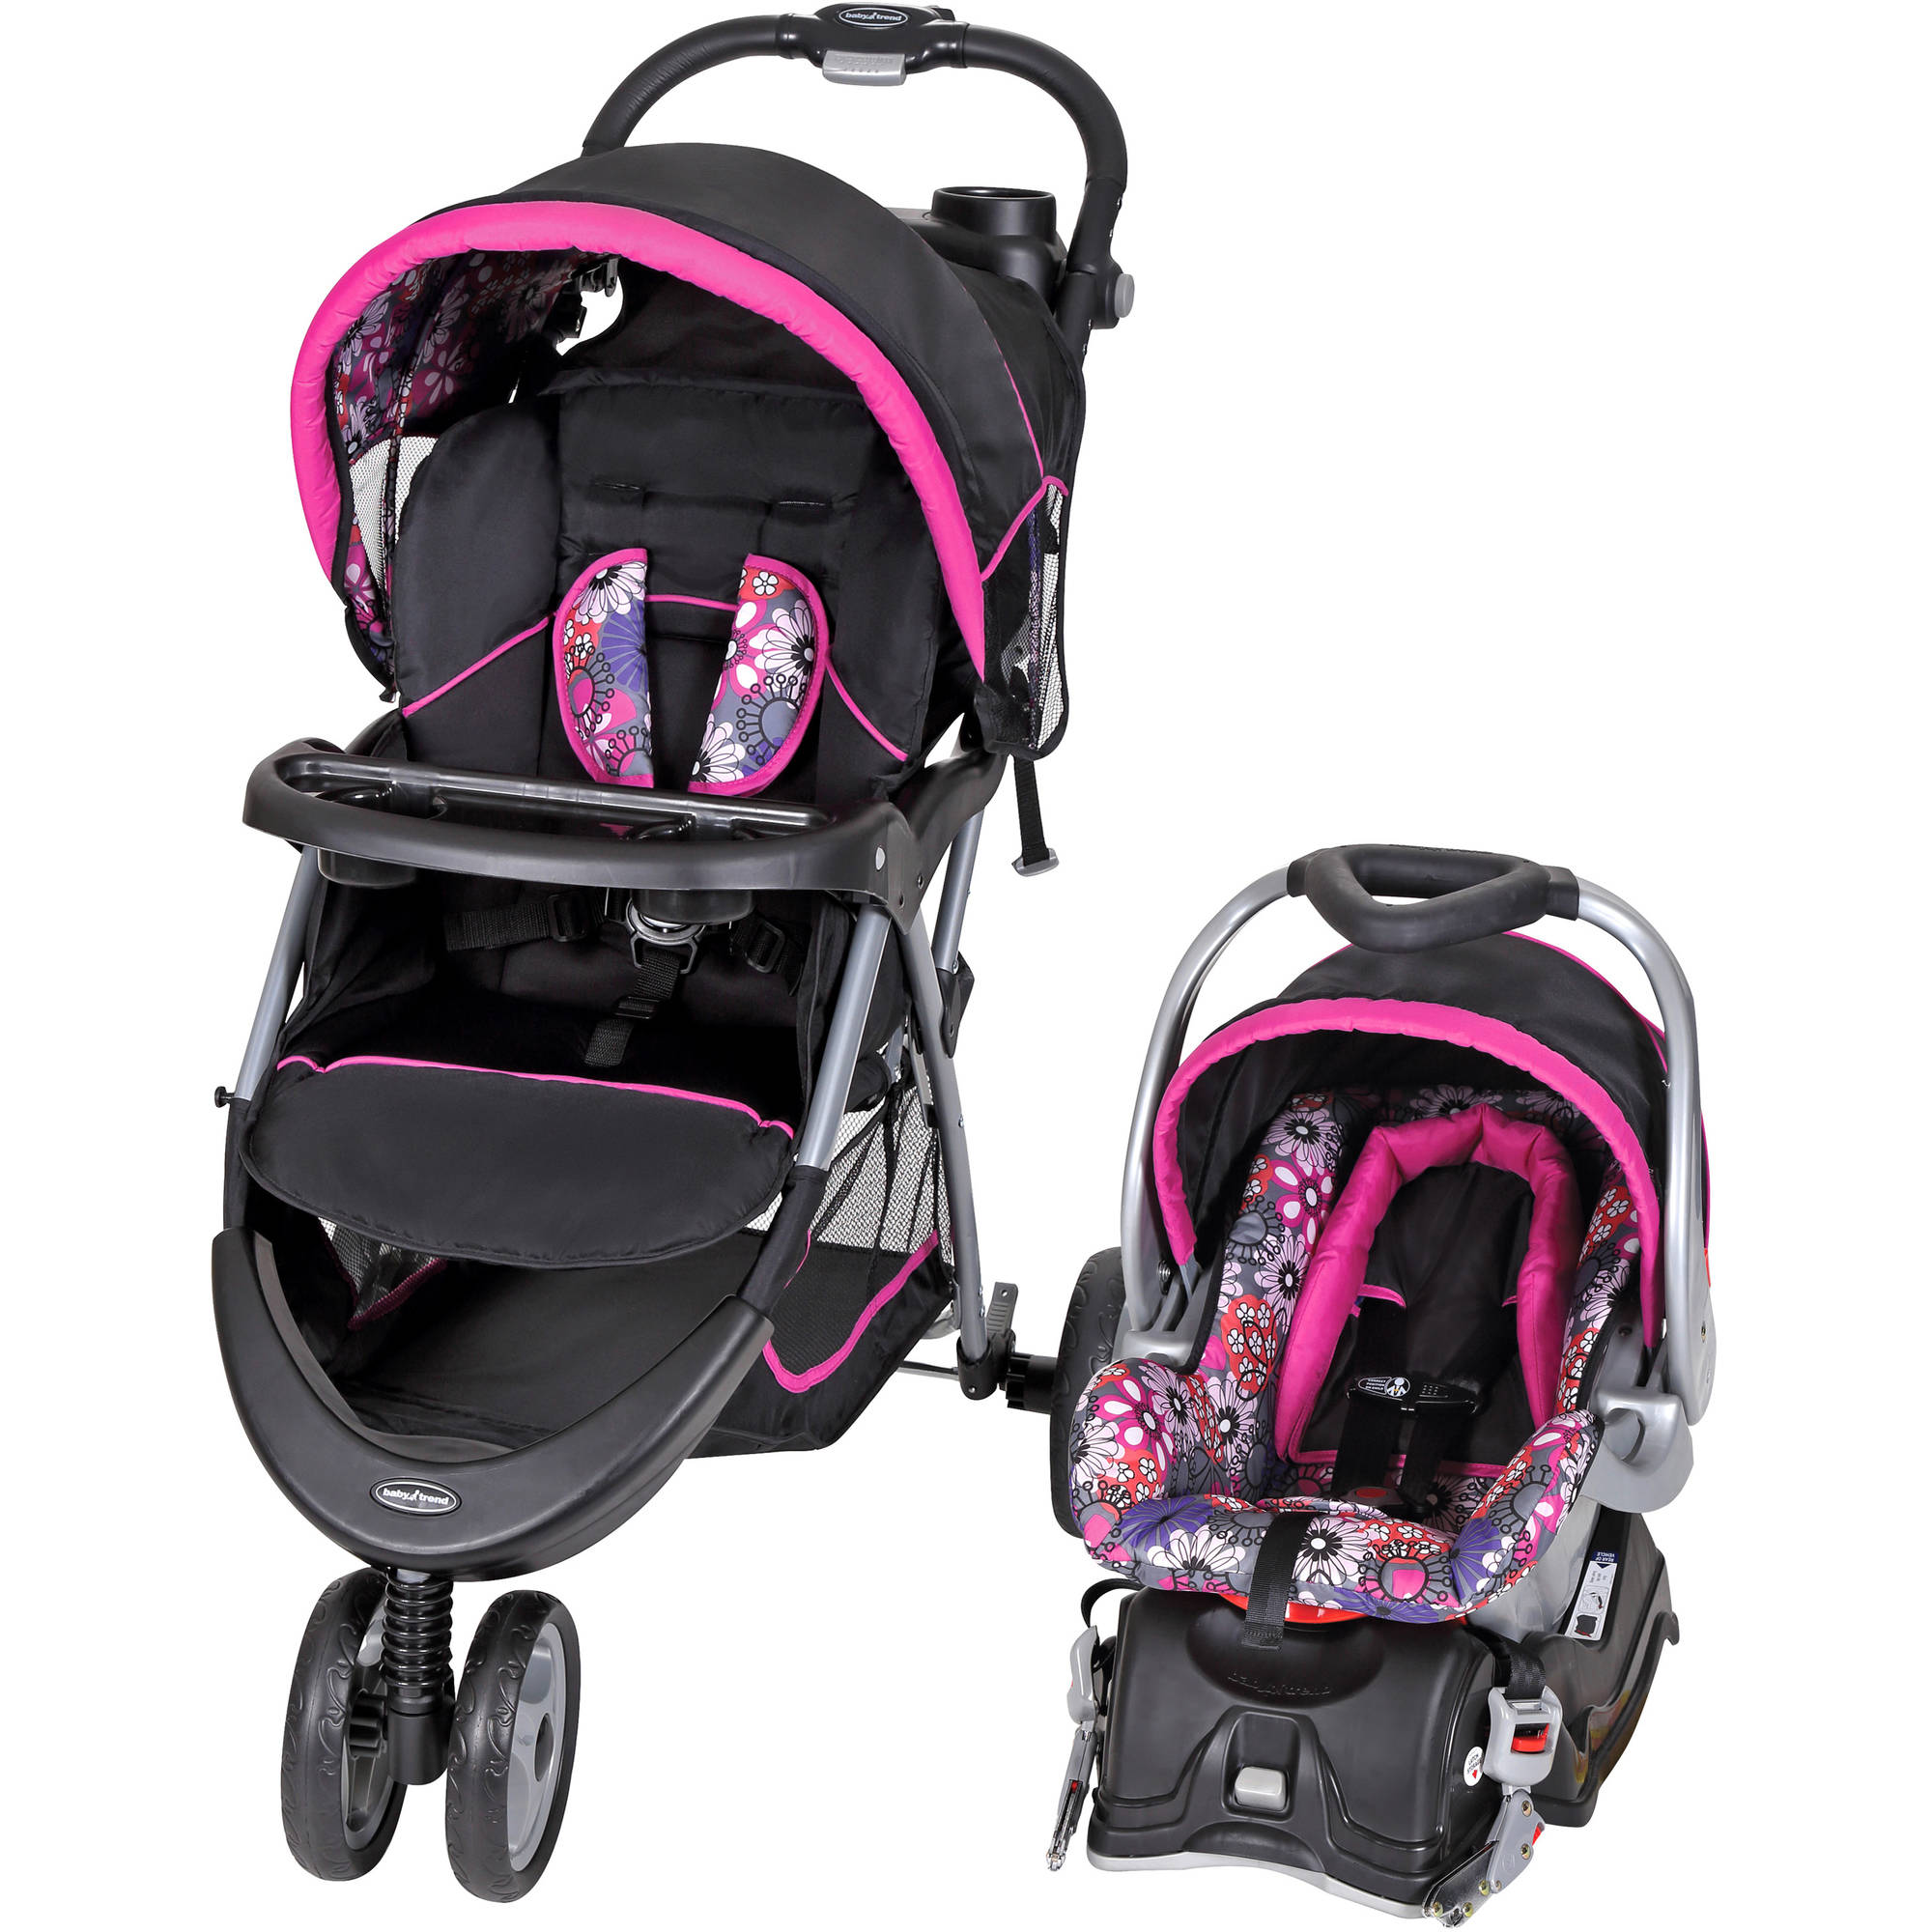 Baby Trend EZ Ride 5 Travel System, Floral Garden Pink - image 1 of 5